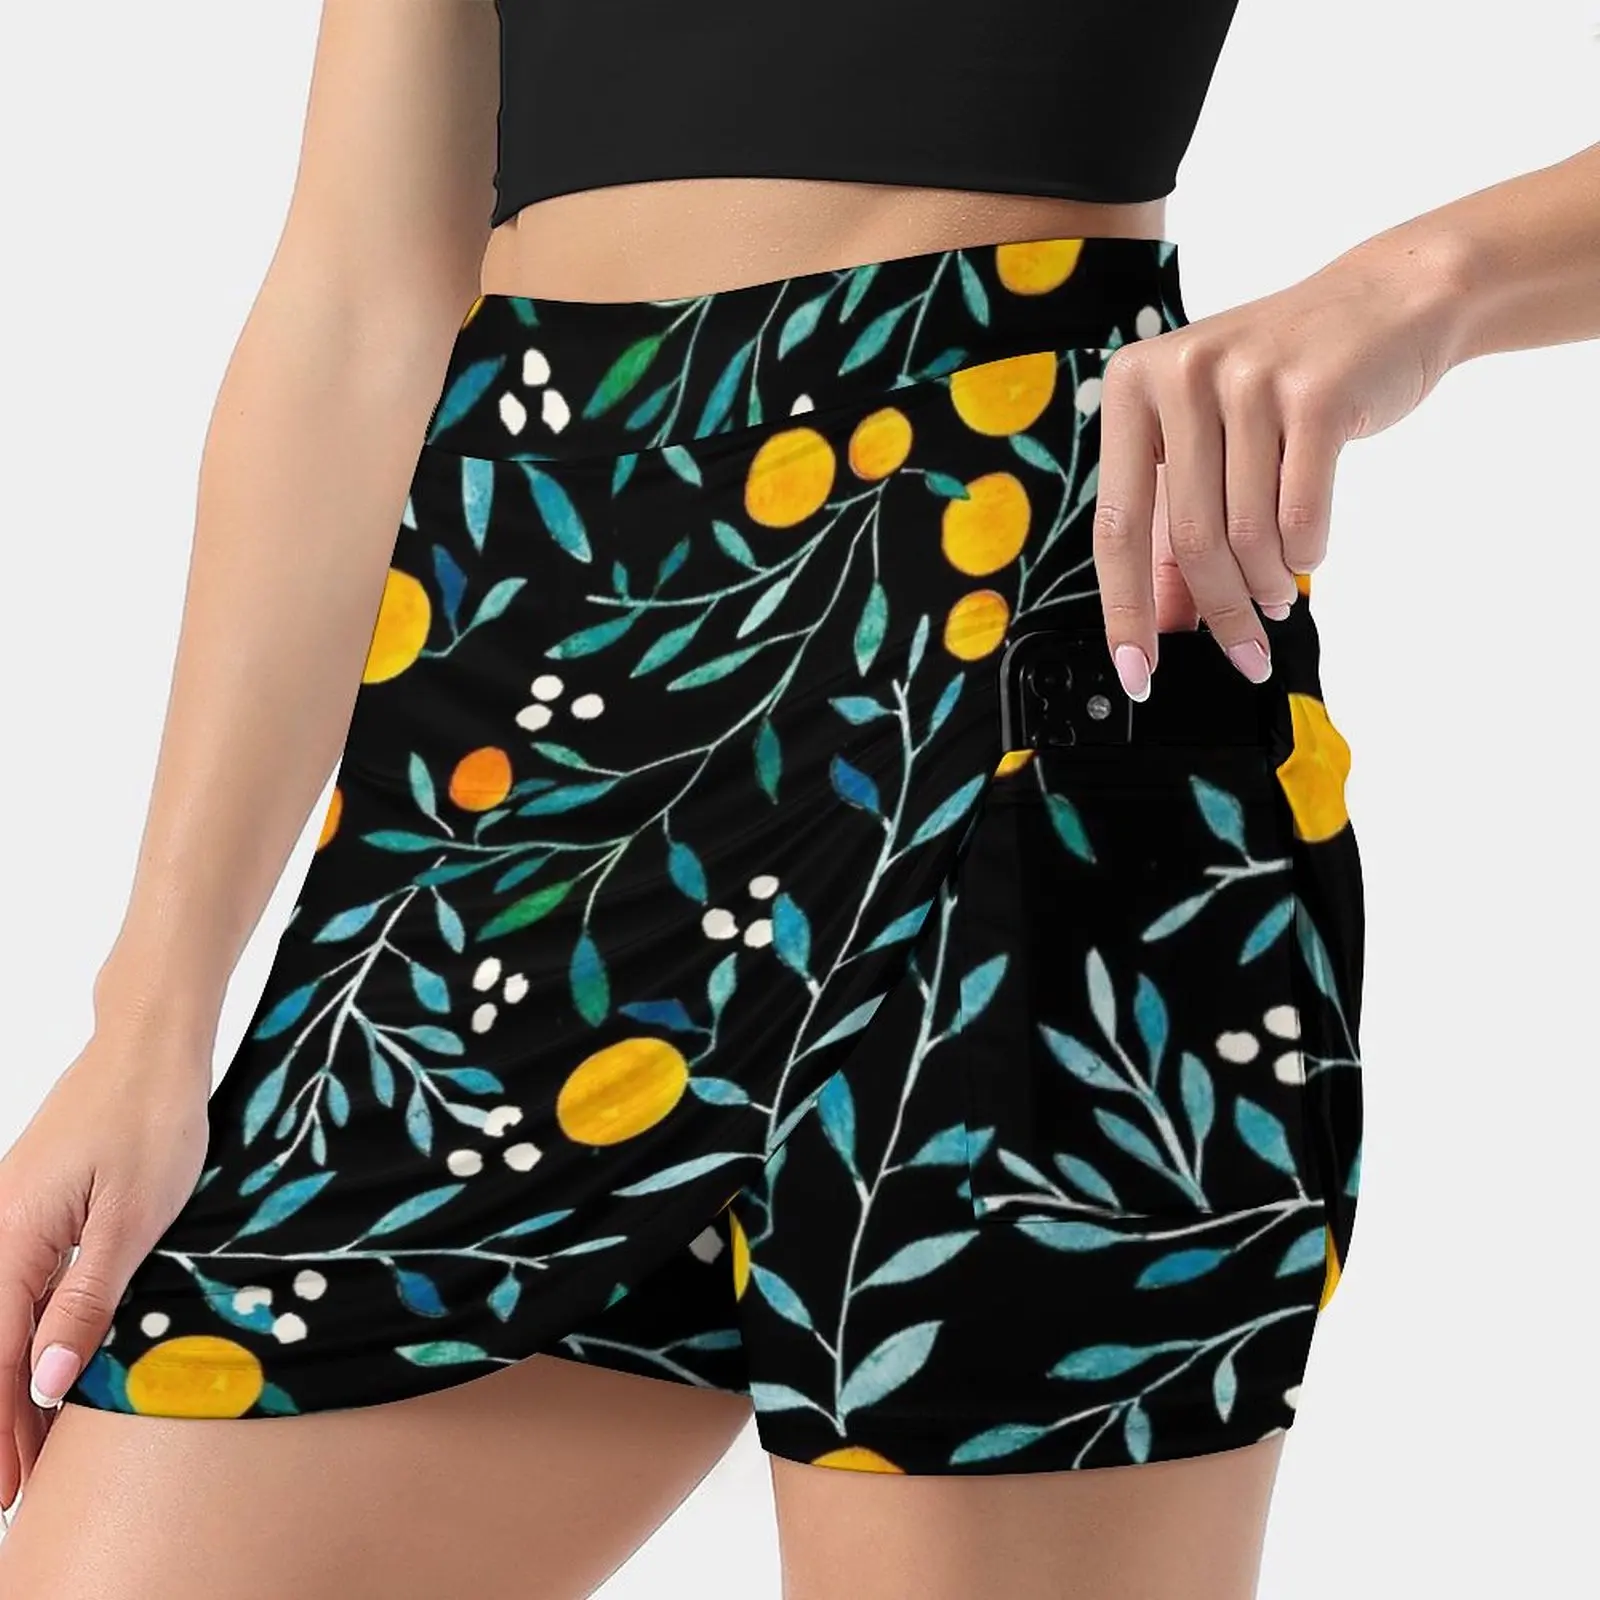 

Oranges On Black Women's skirt Mini Skirts A Line Skirt With Hide Pocket Watercolor Pattern Floral Floral Pattern Pattern